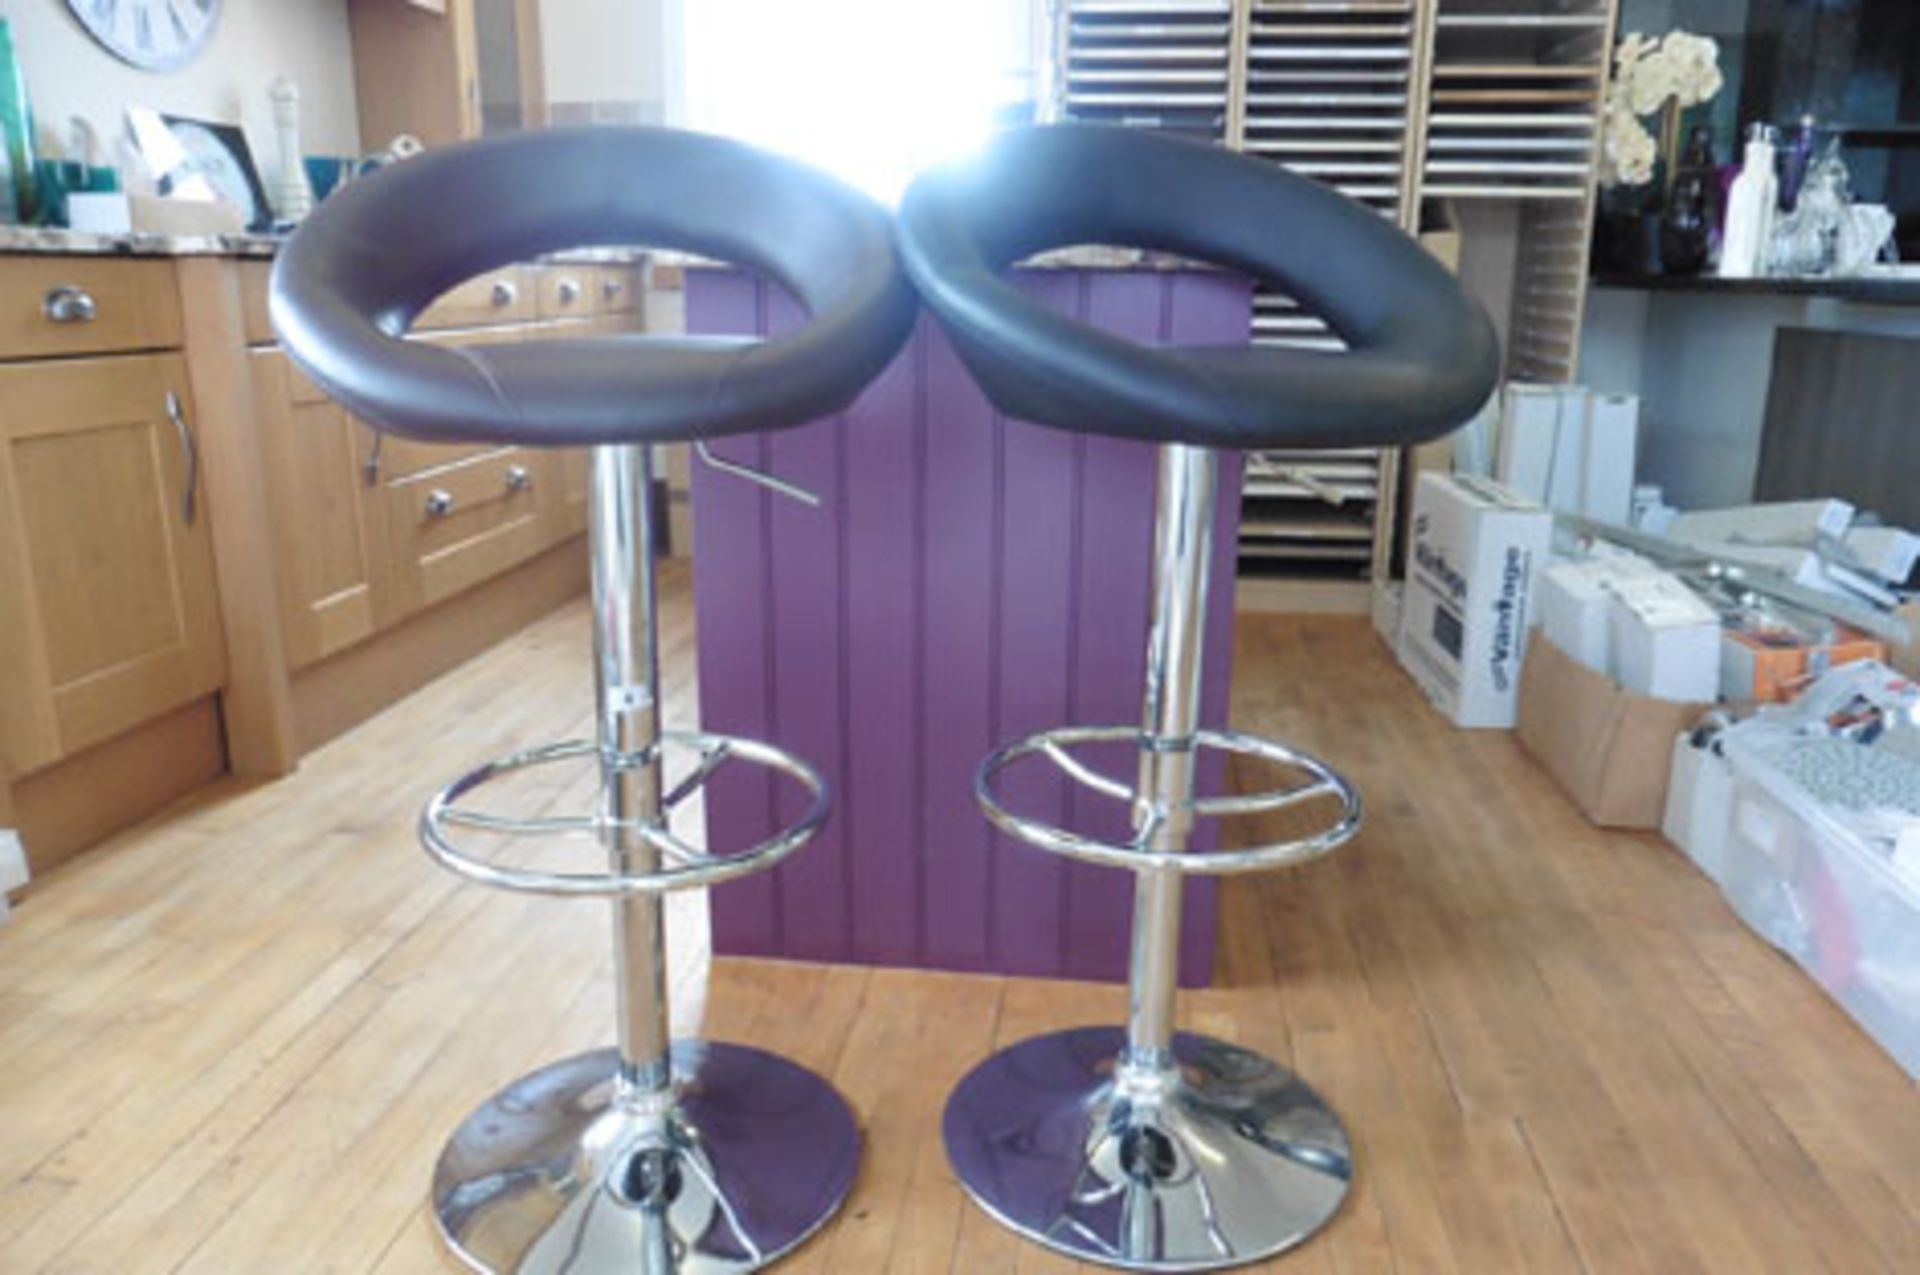 2 leather upholstered and chrome based bar stools with adjustable height (1 chocolate, 1 black)